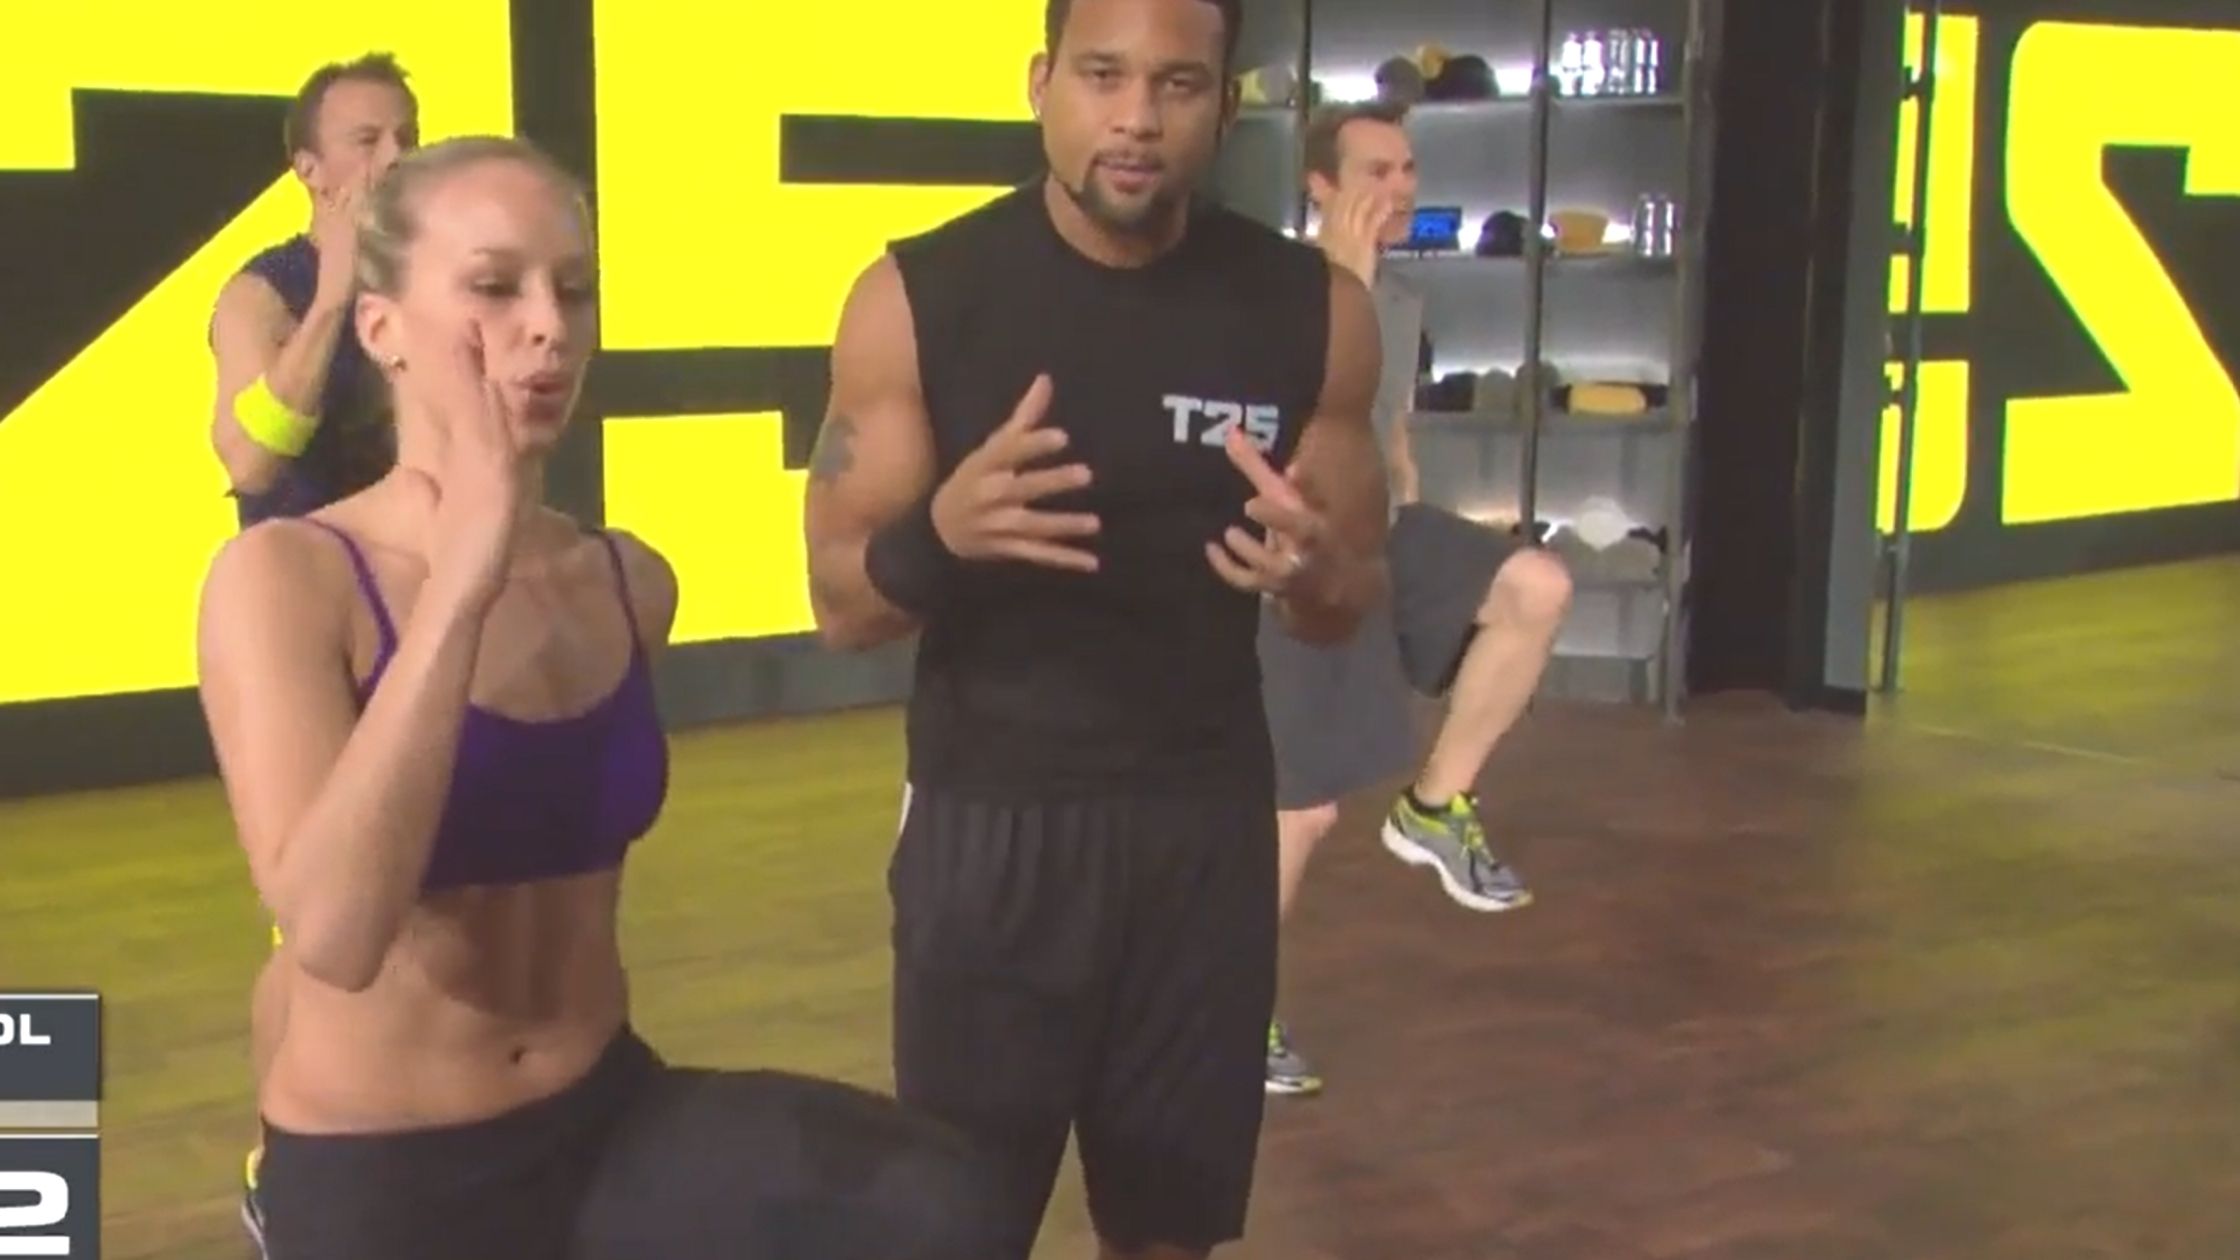 t25 workout video free